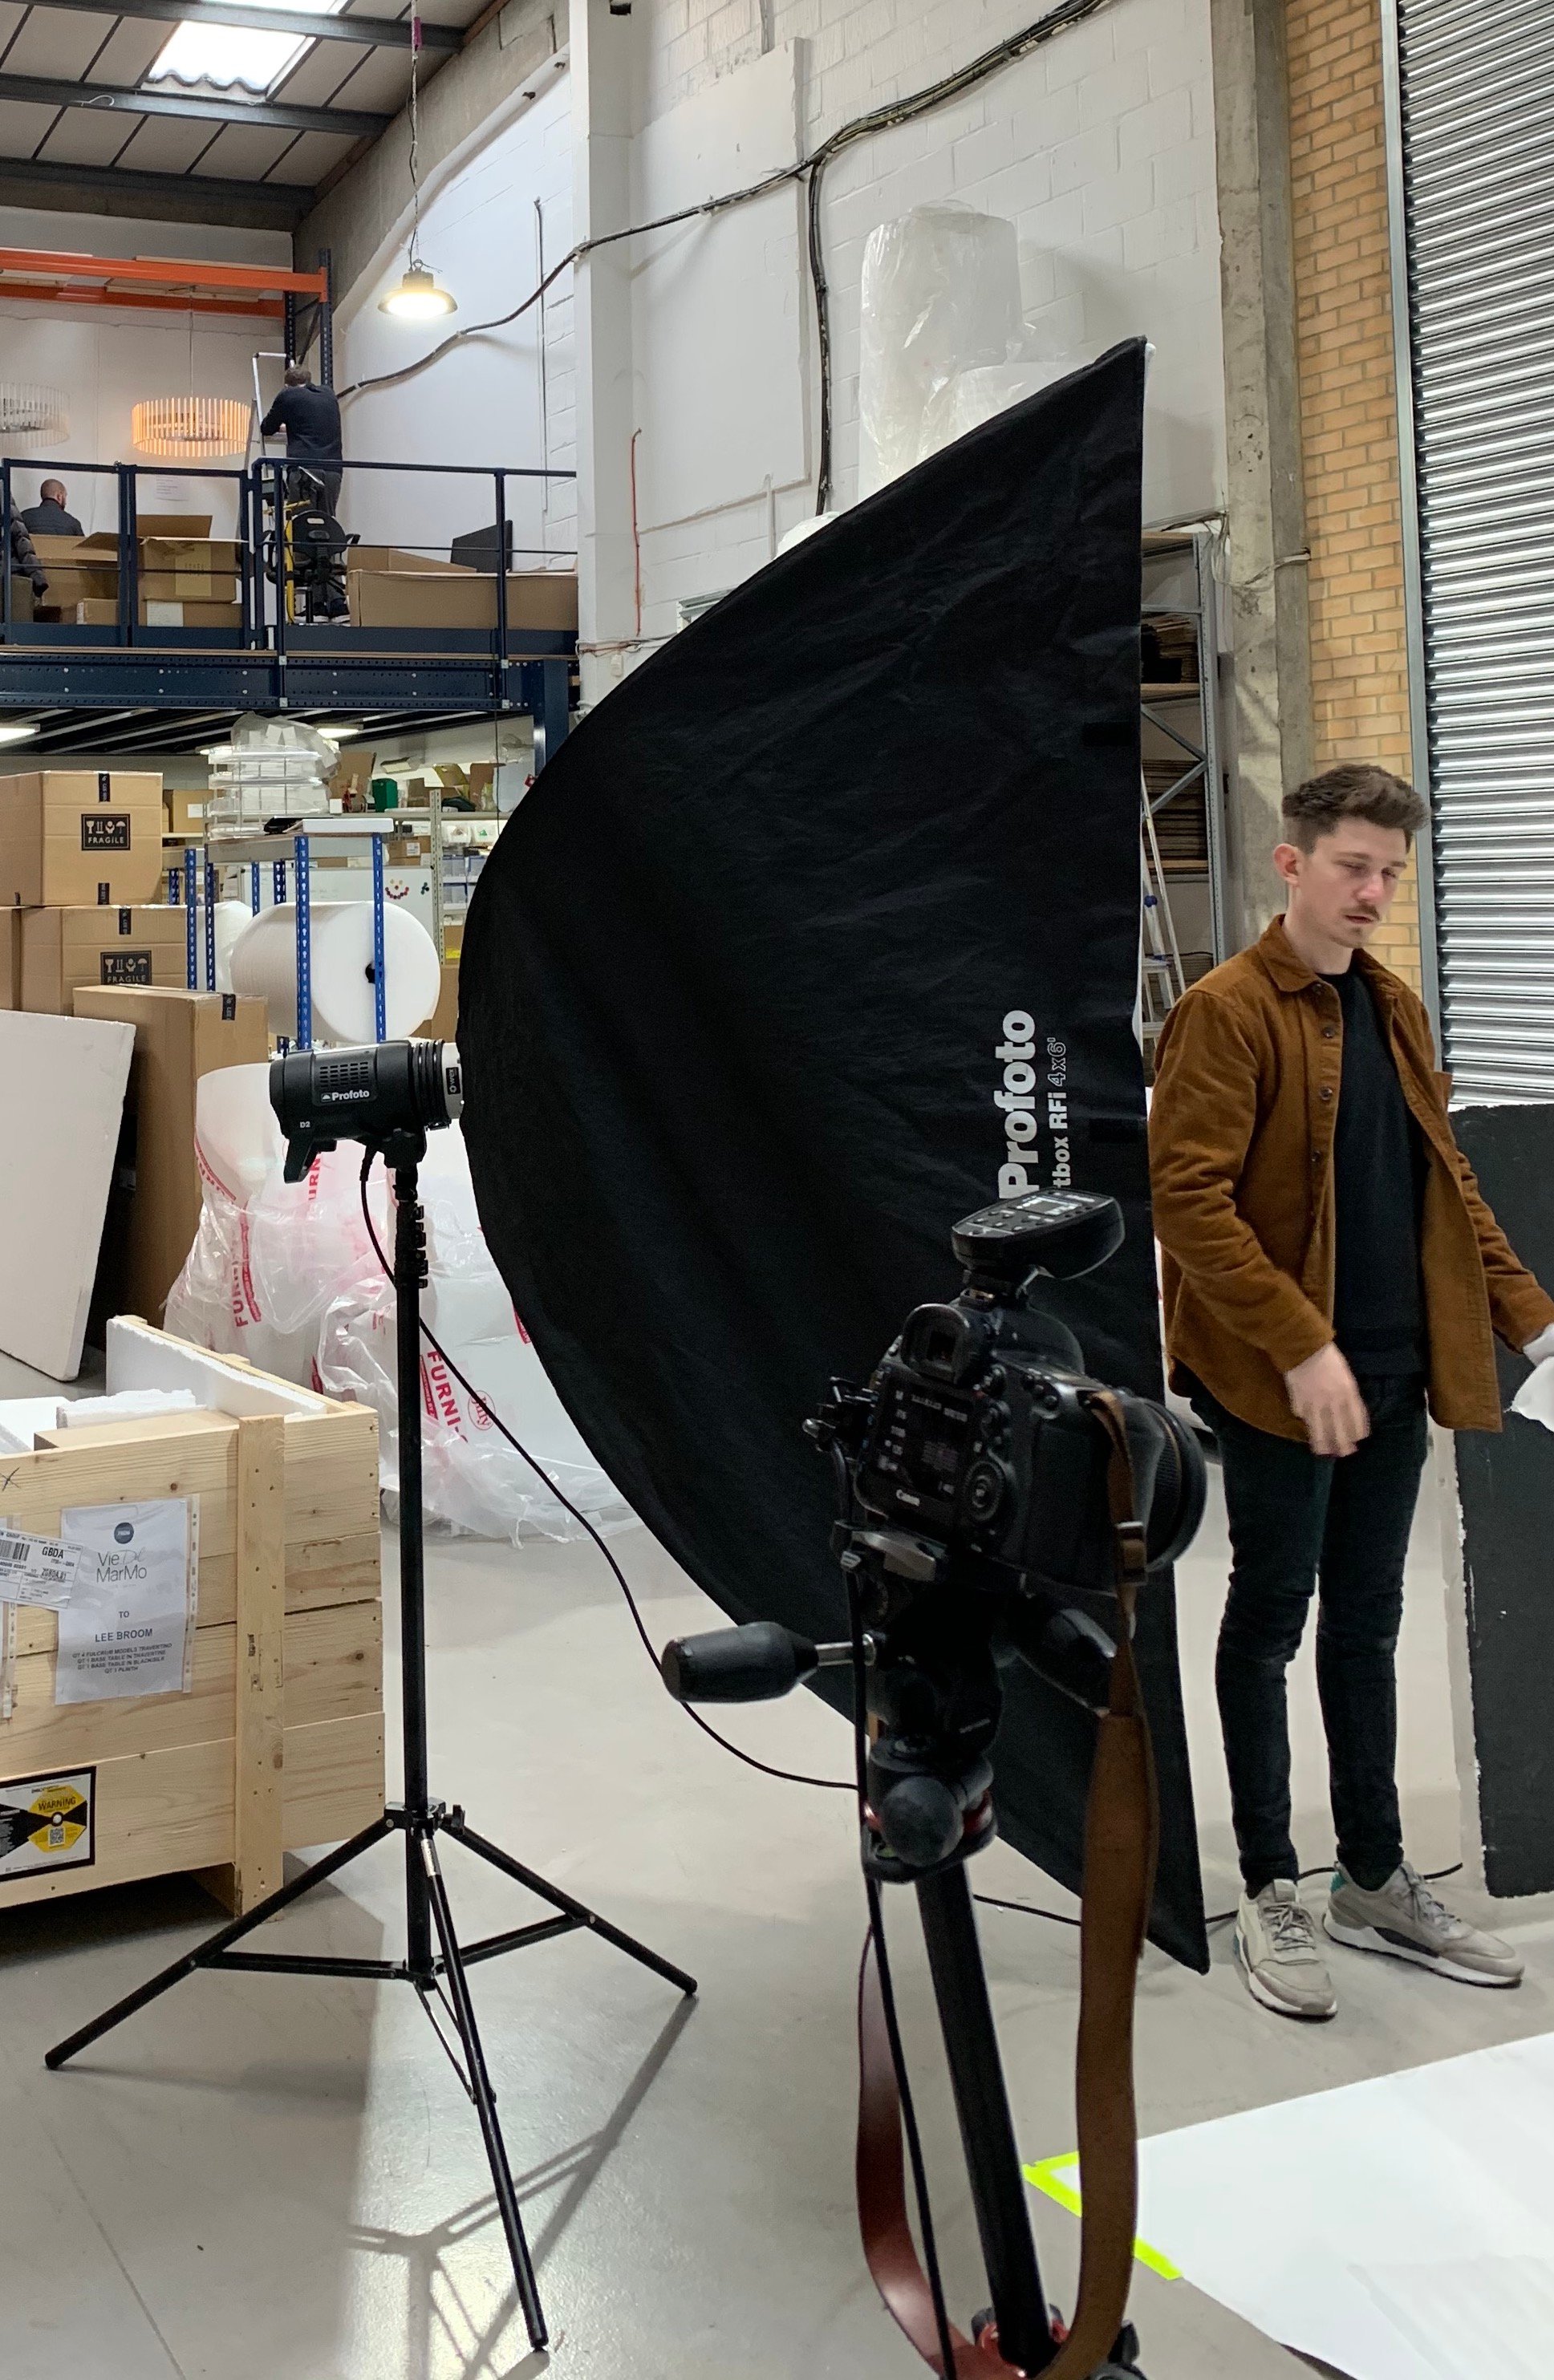 At Lee Broom HQ everything is produced inhouse, from design, assembly and distribution, to the management of the brand's identity. Photo c/o Lee Broom. 